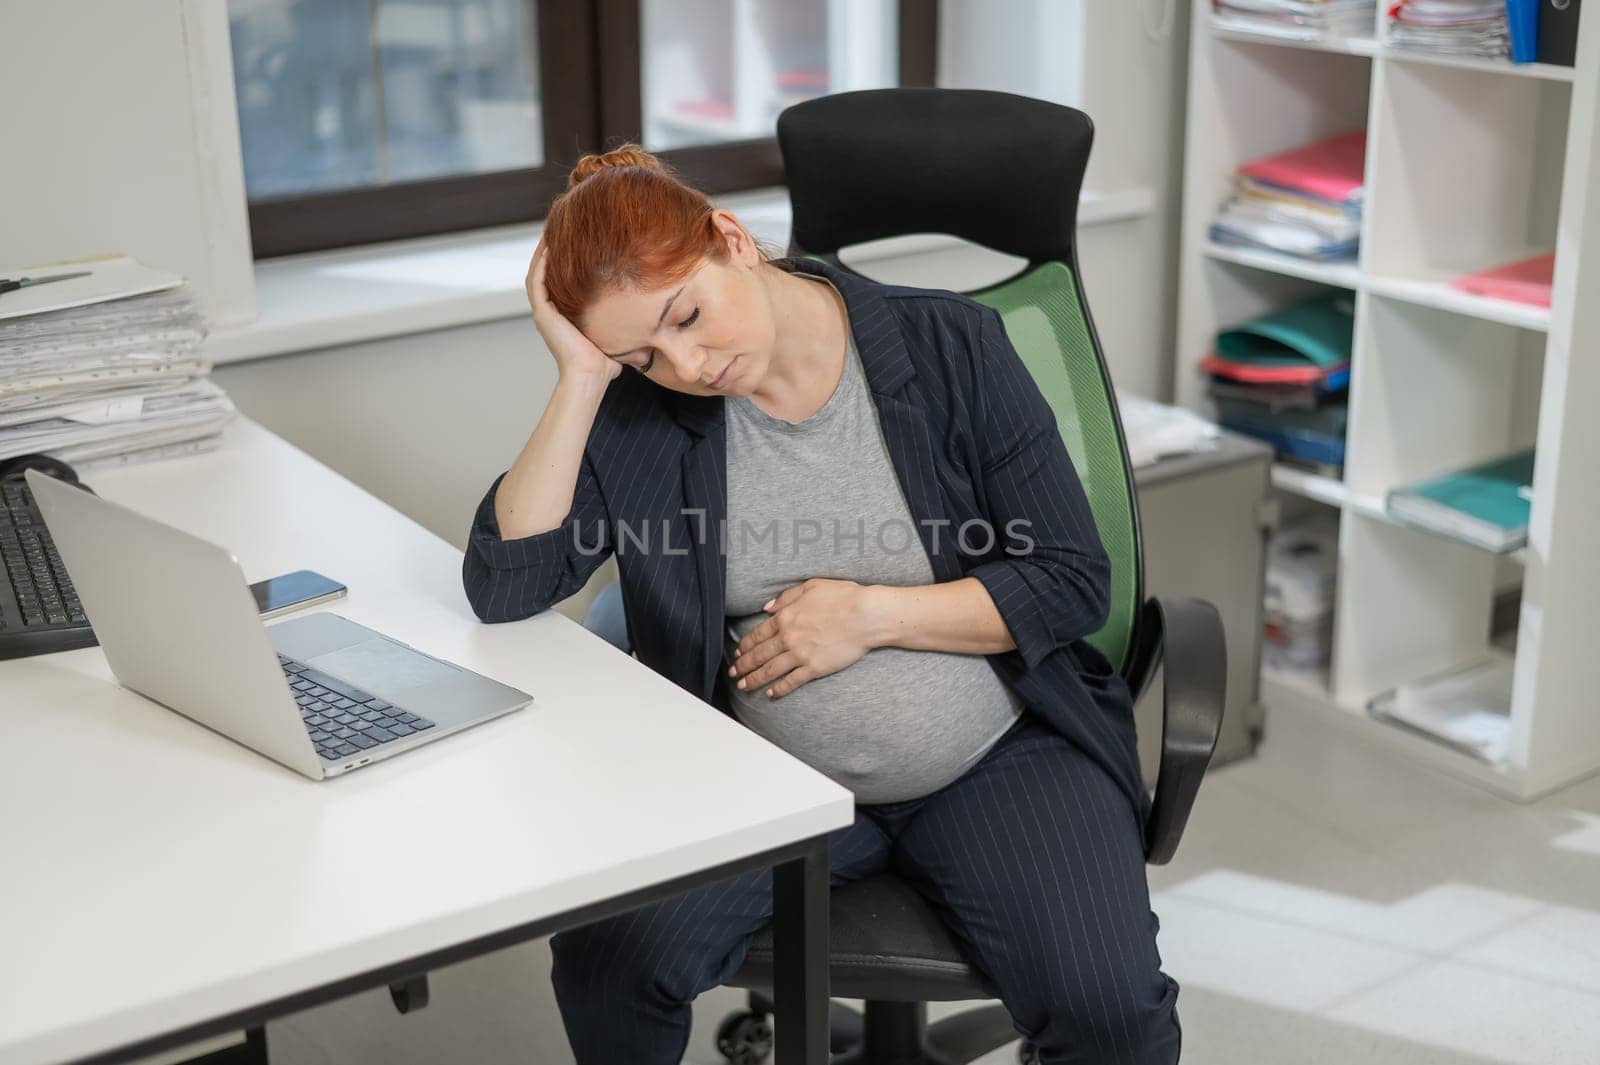 Pregnant woman sleeping at her desk in the office